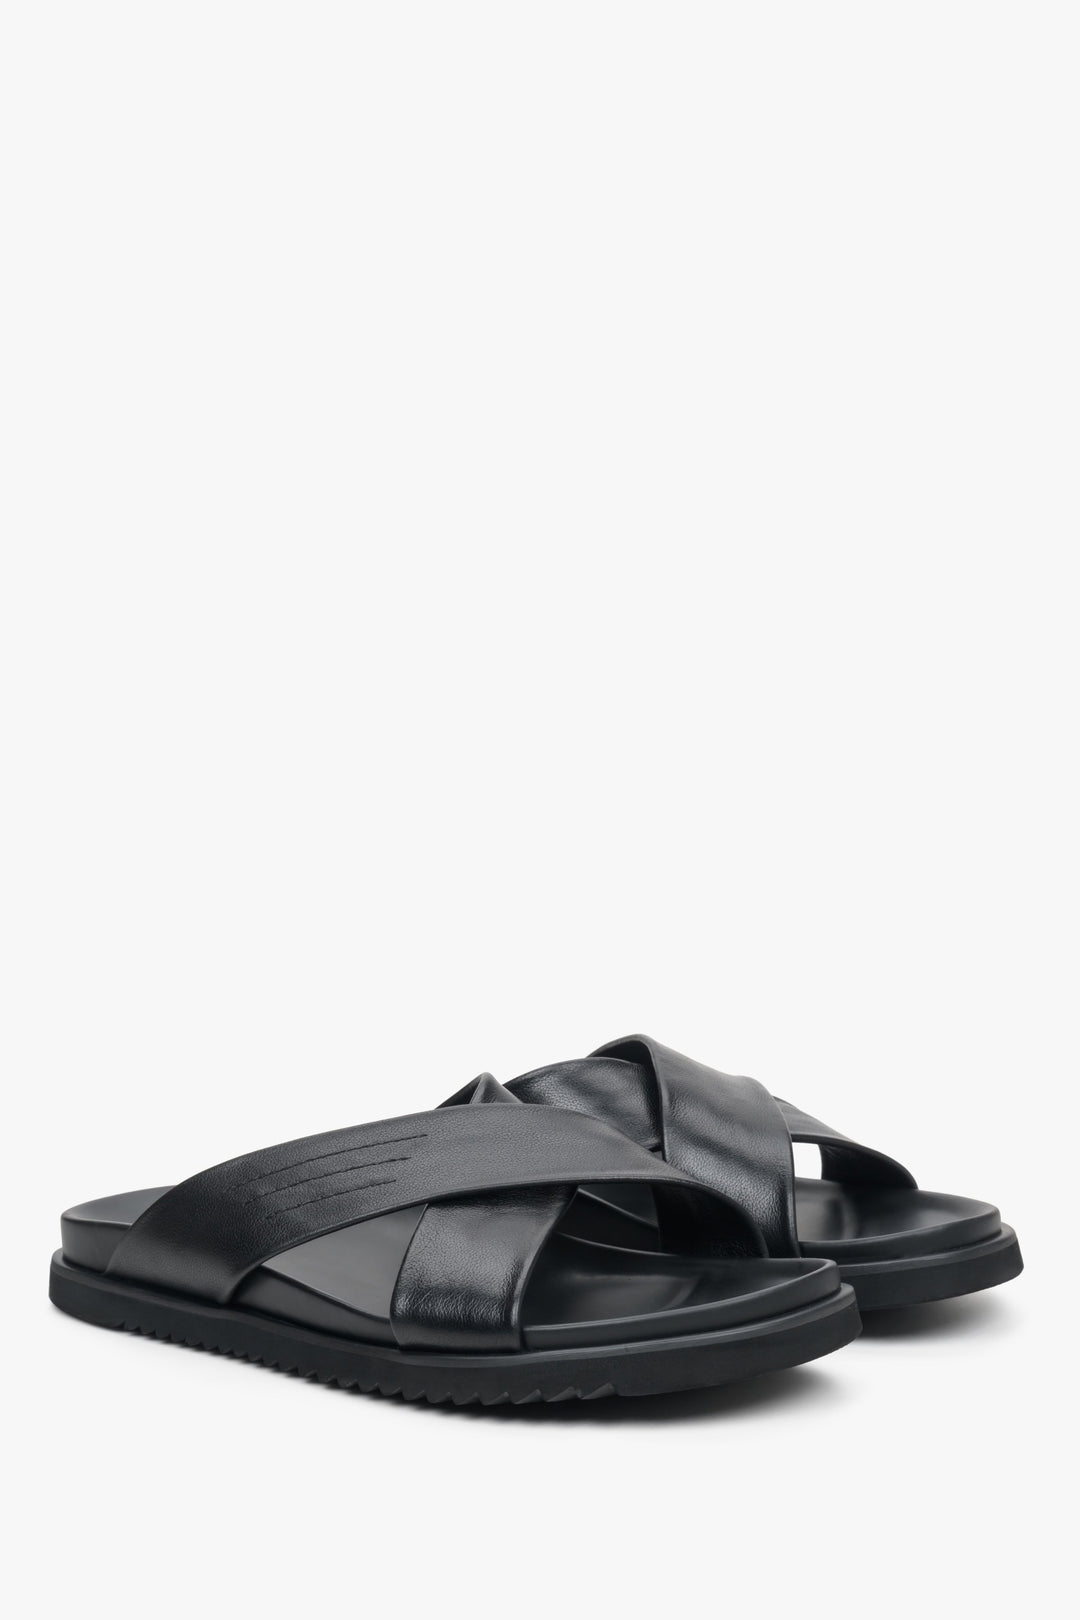 Men's black sandals by Estro made of genuine and synthetic leather.